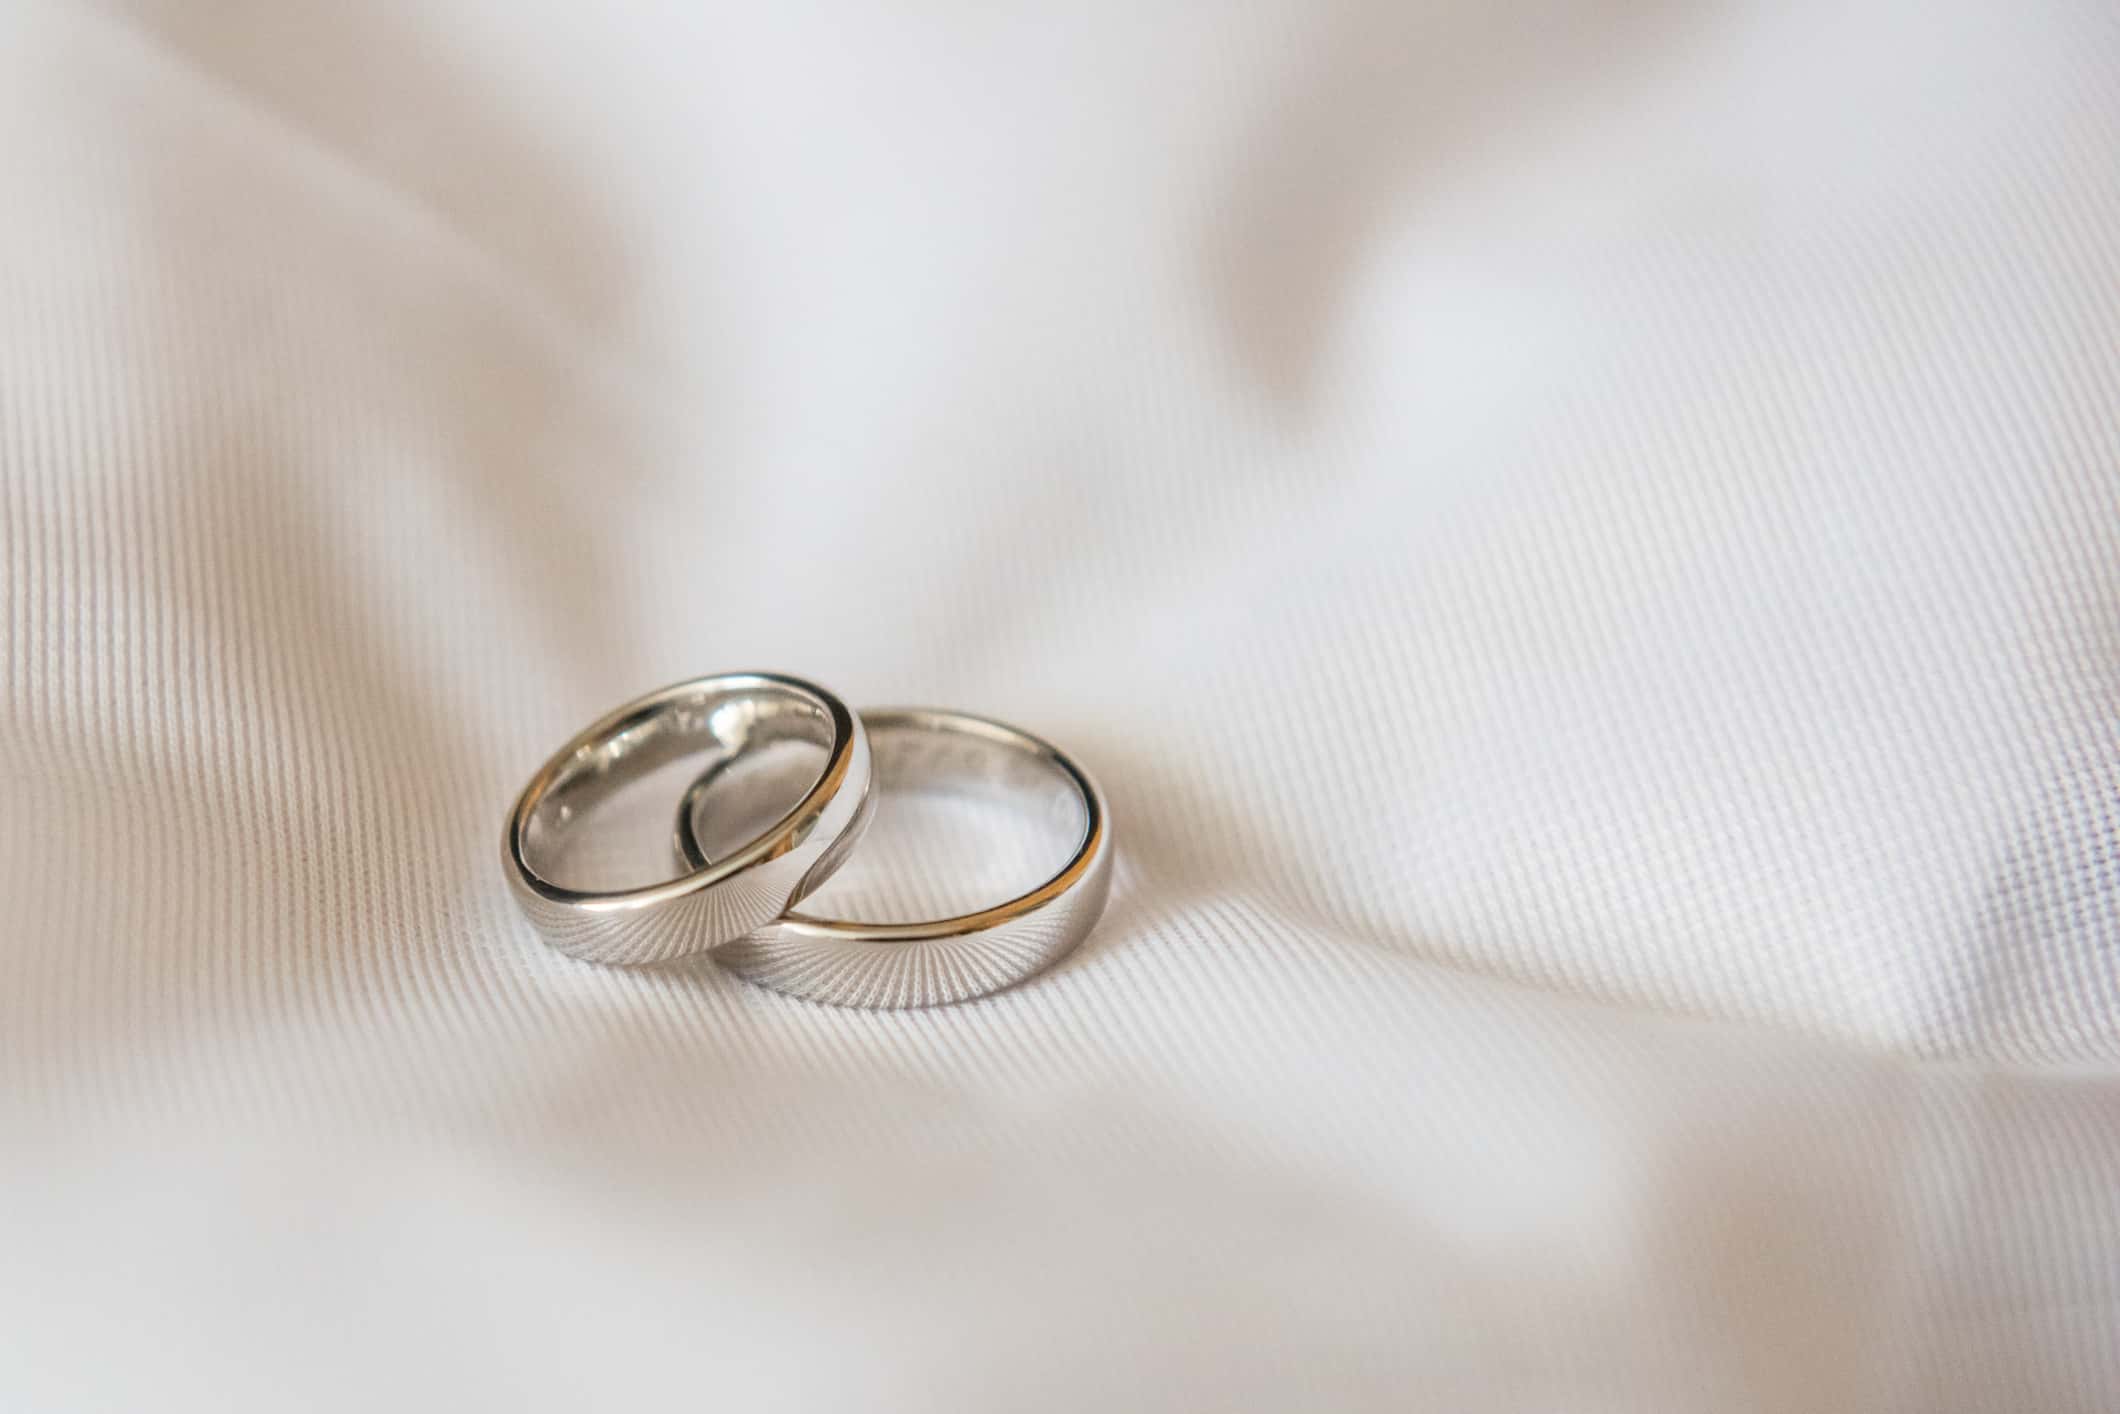 Close-Up Of Wedding Rings On Tablecloth